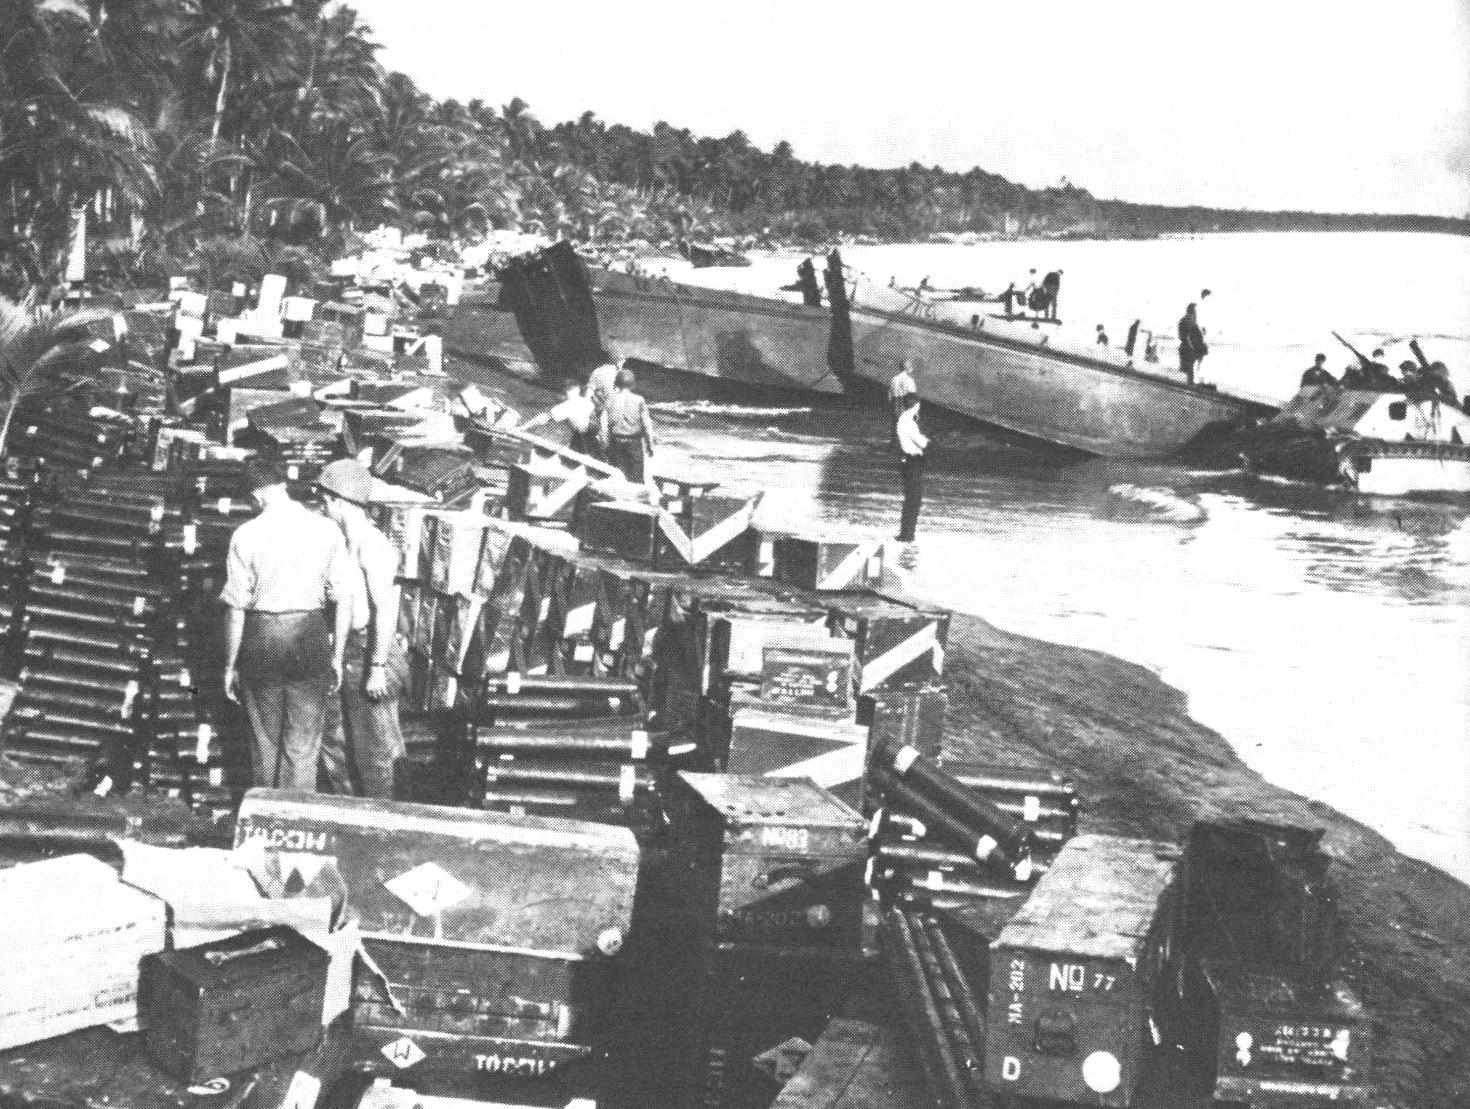 Supplies landed on the beach at Guadalcanal by landing craft, August 1942. Coast Guardsmen and watercraft kept critically needed supplies flowing to the 1st Marine Division fighting in the jungles of Guadalcanal. (Courtesy of the U.S. Navy)